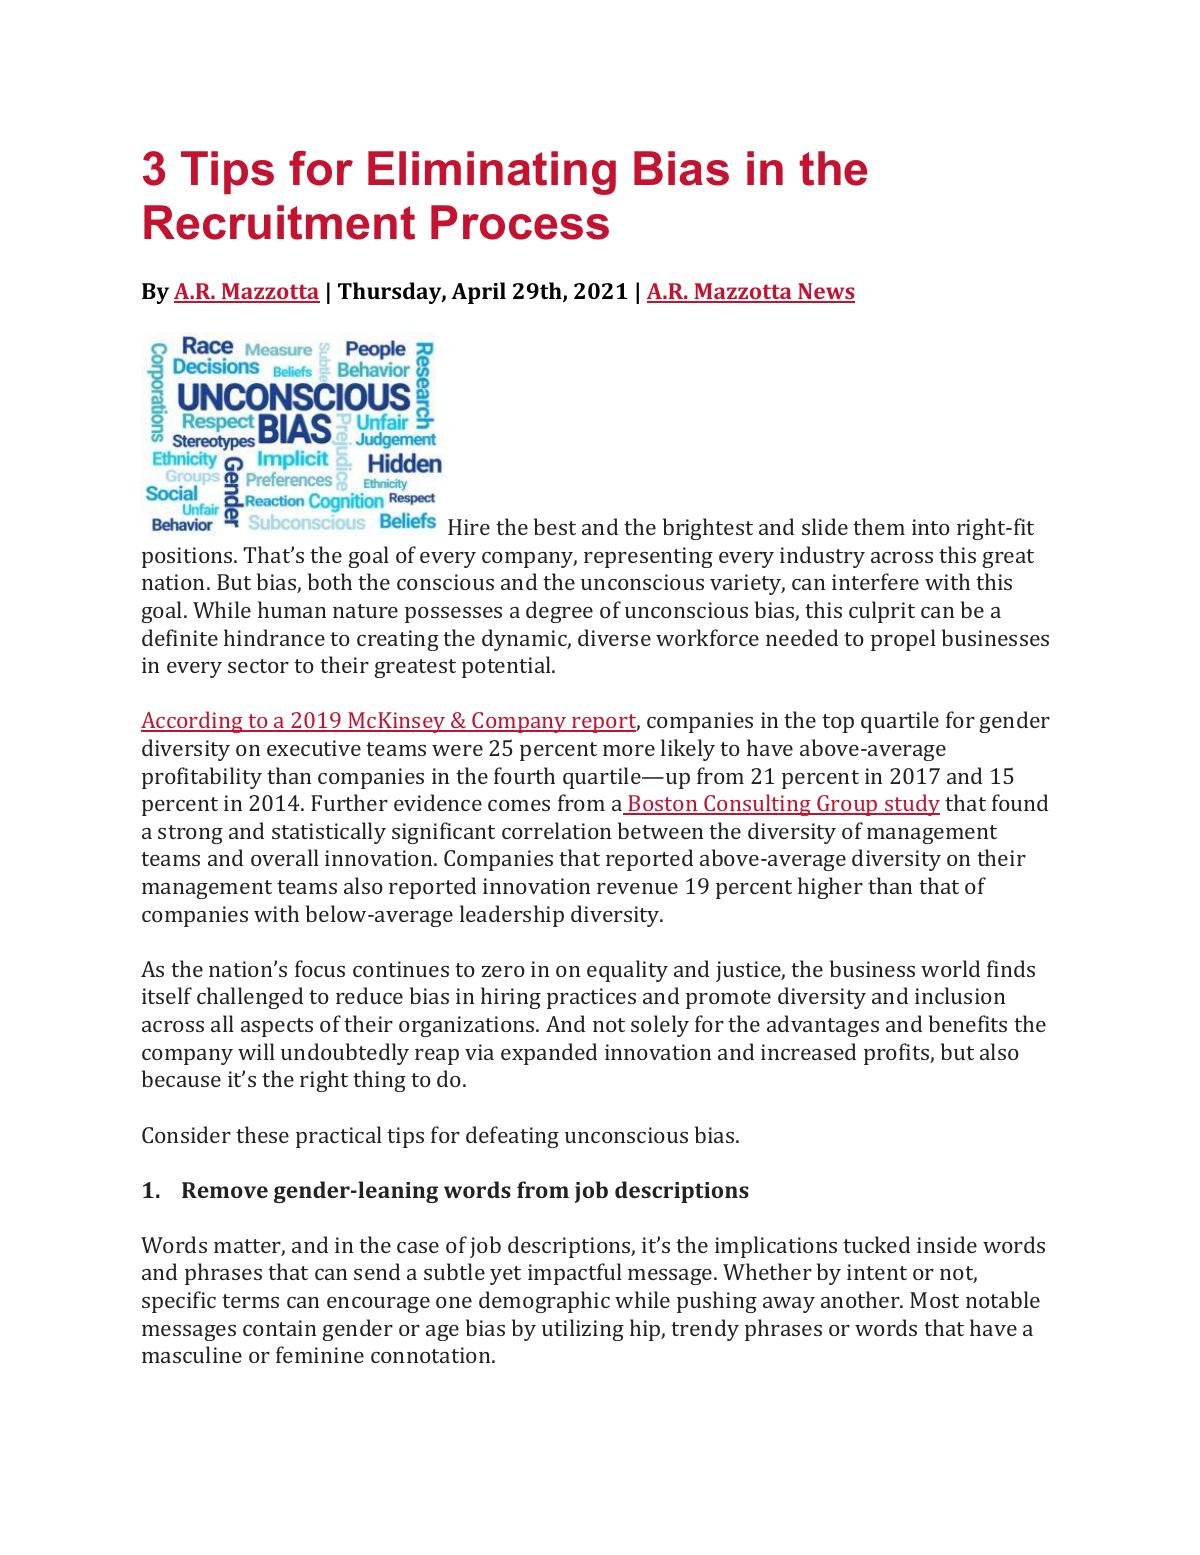 3 Tips for Eliminating Bias in the Recruitment Process